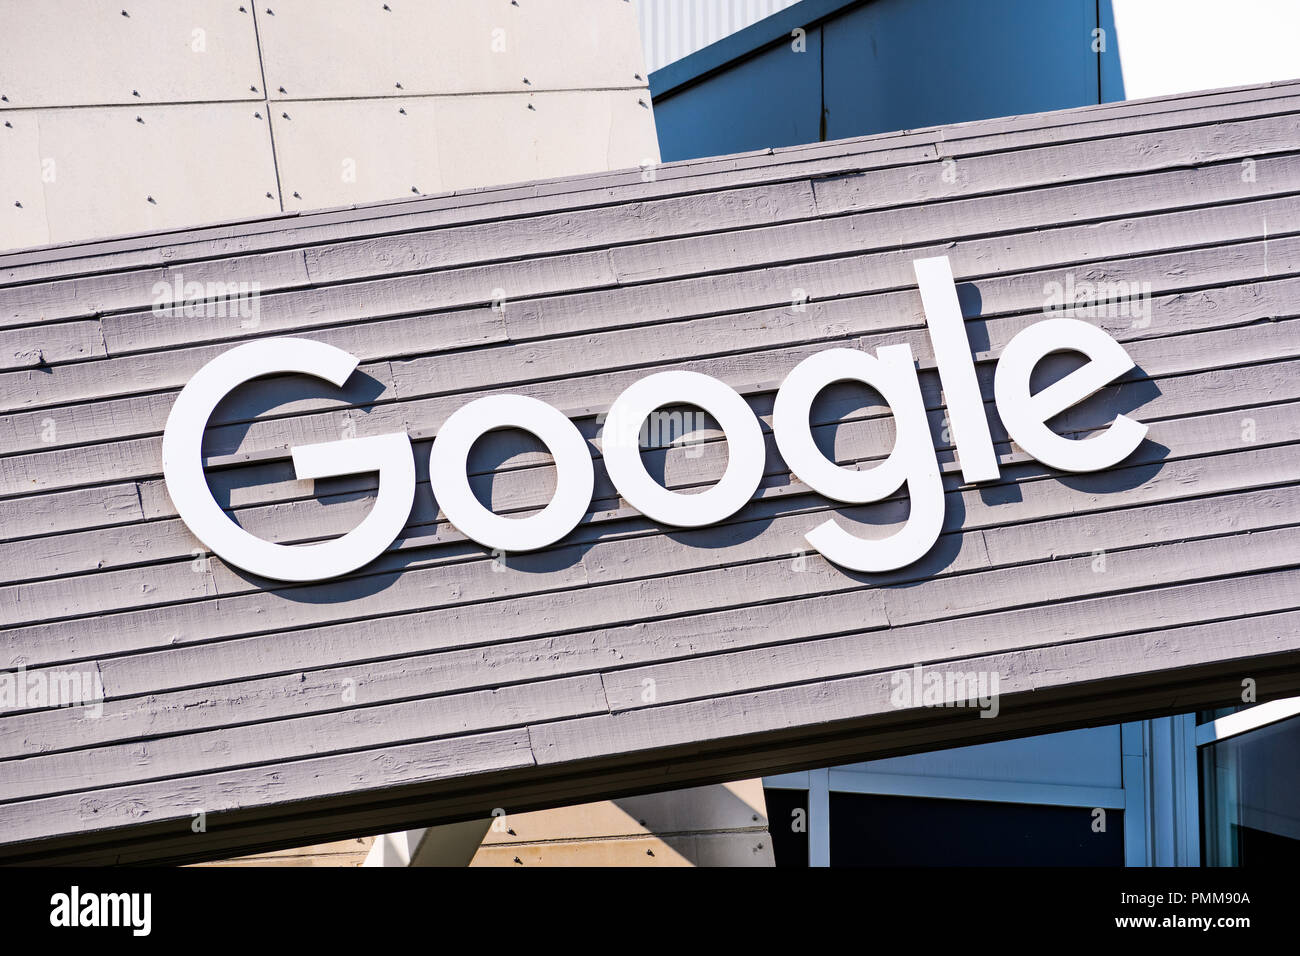 August 19, 2018 Mountain View / CA / USA - Google logo on one of the buildings situated in Googleplex, the company's main campus in Silicon Valley Stock Photo